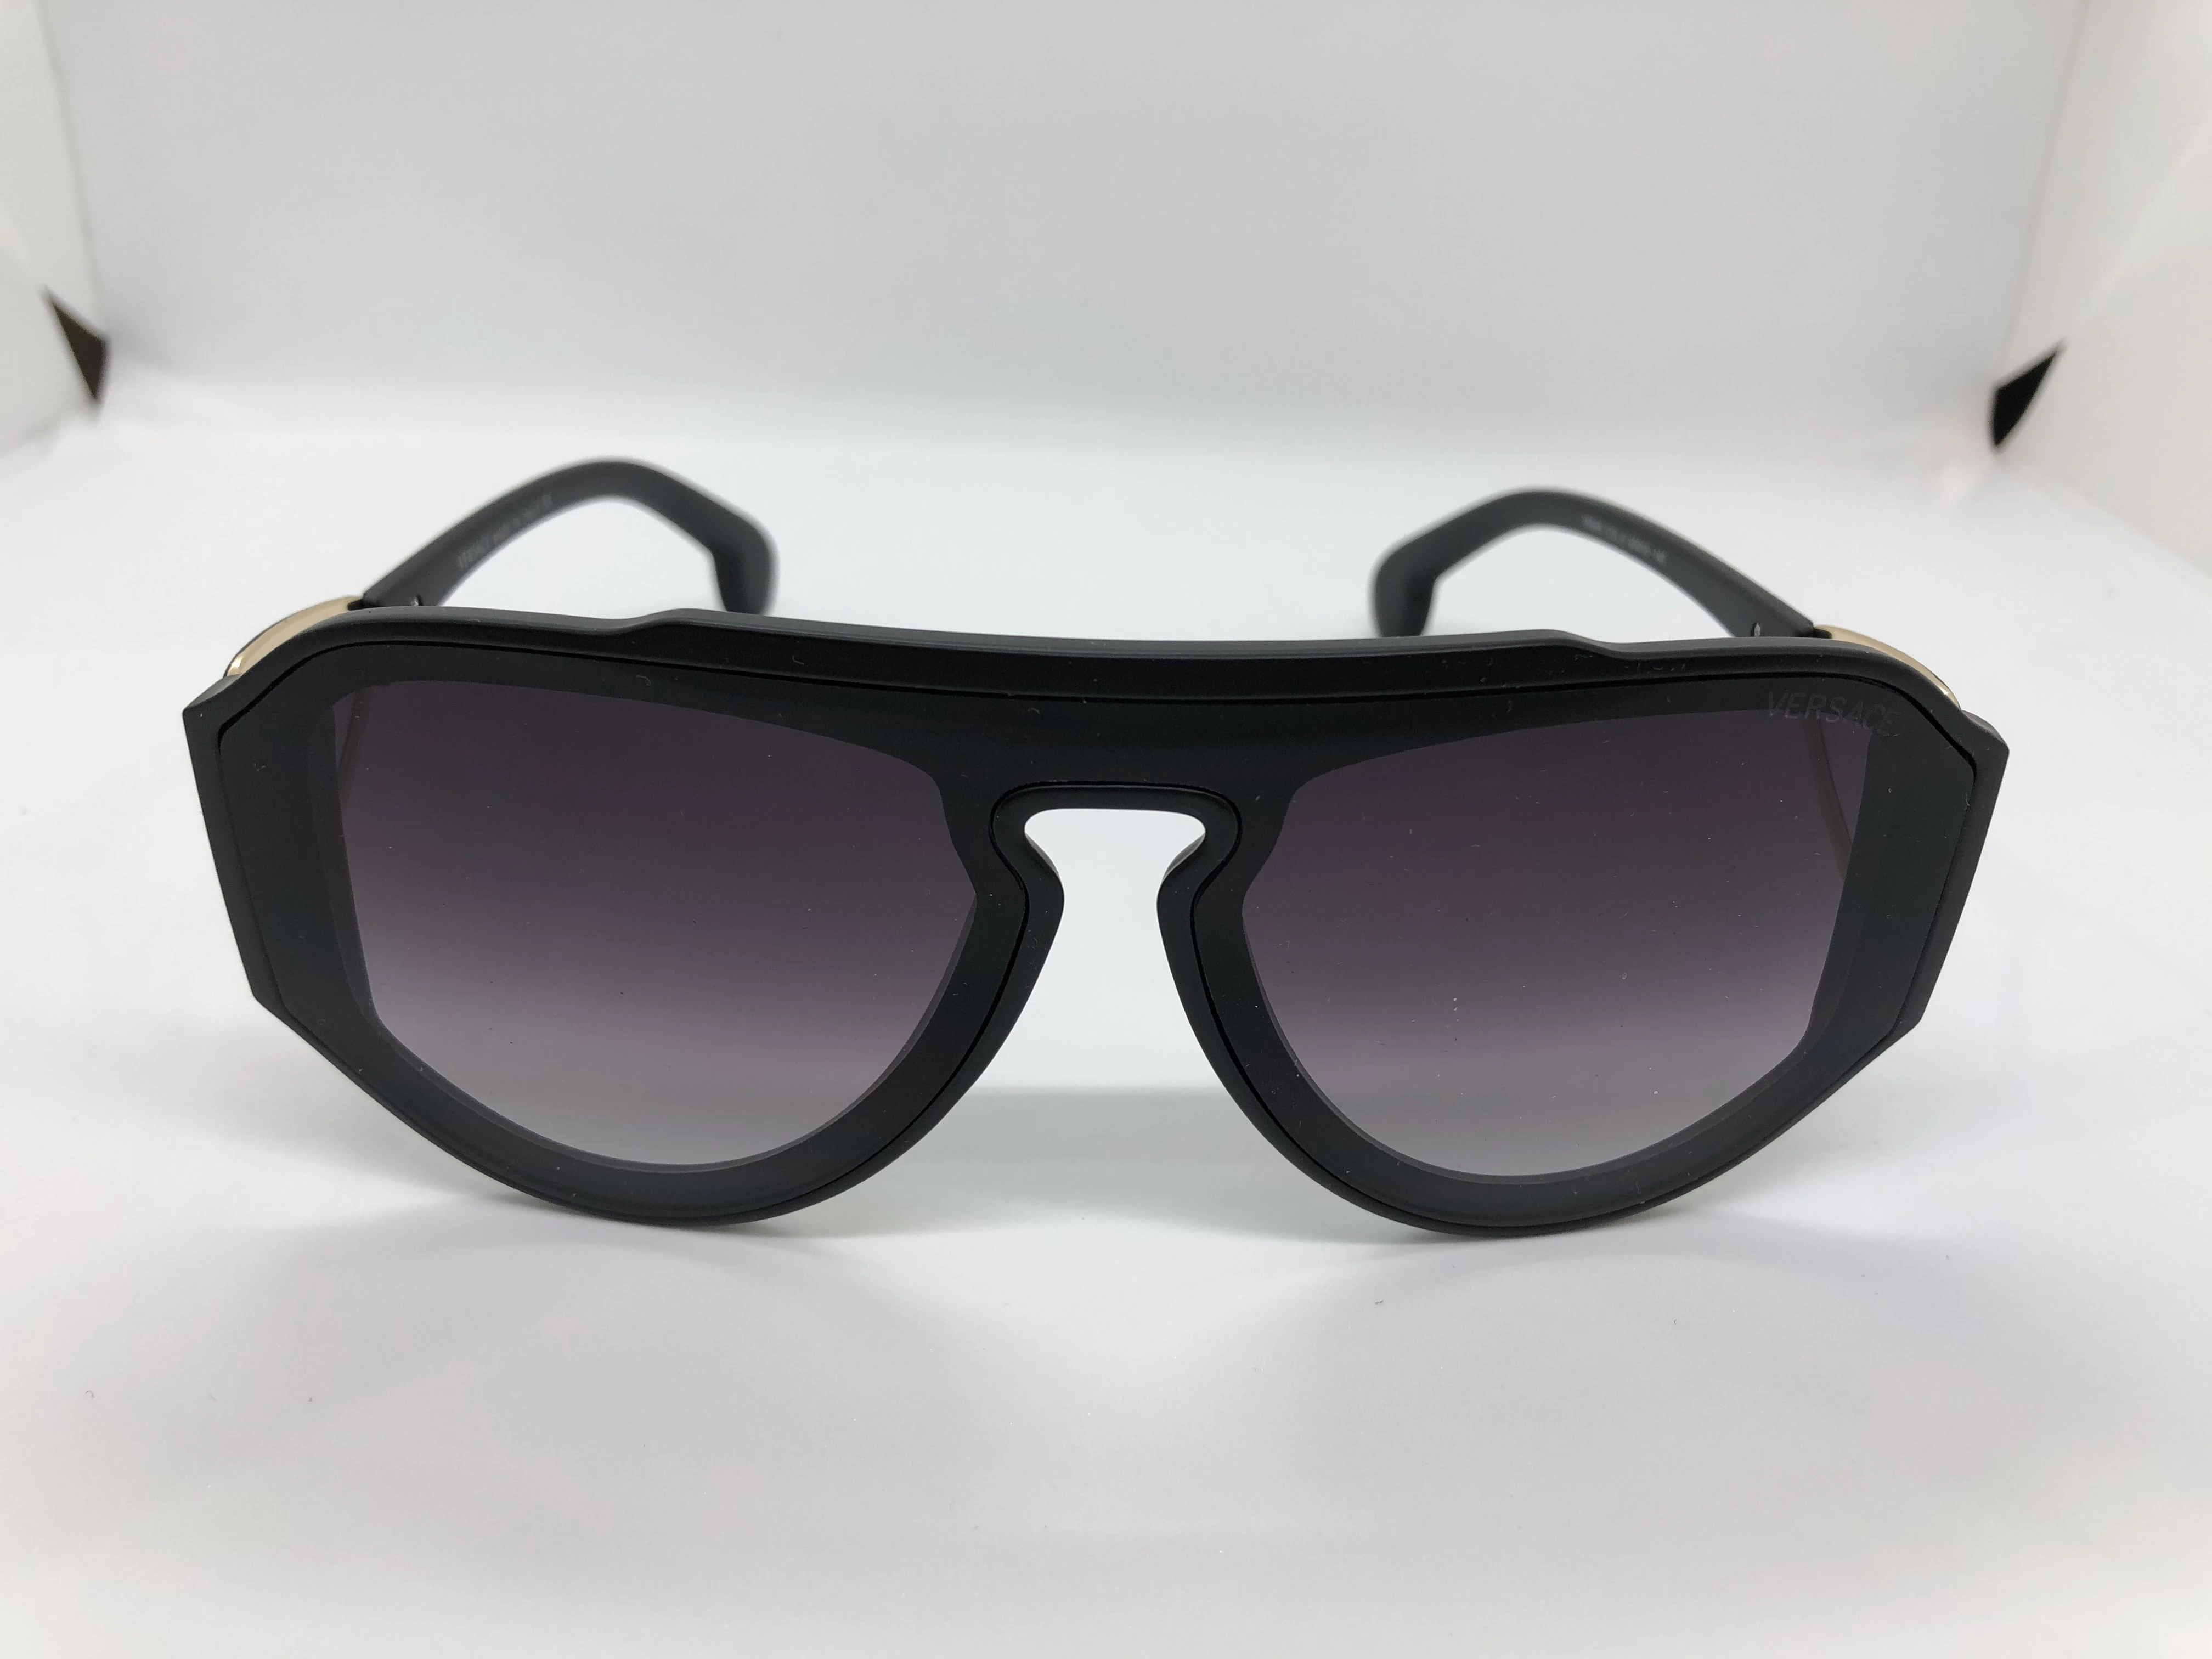 Sunglasses - from Versace - black polycarbonate frame - black gradient lenses - black polycarbonate arm - with a golden logo